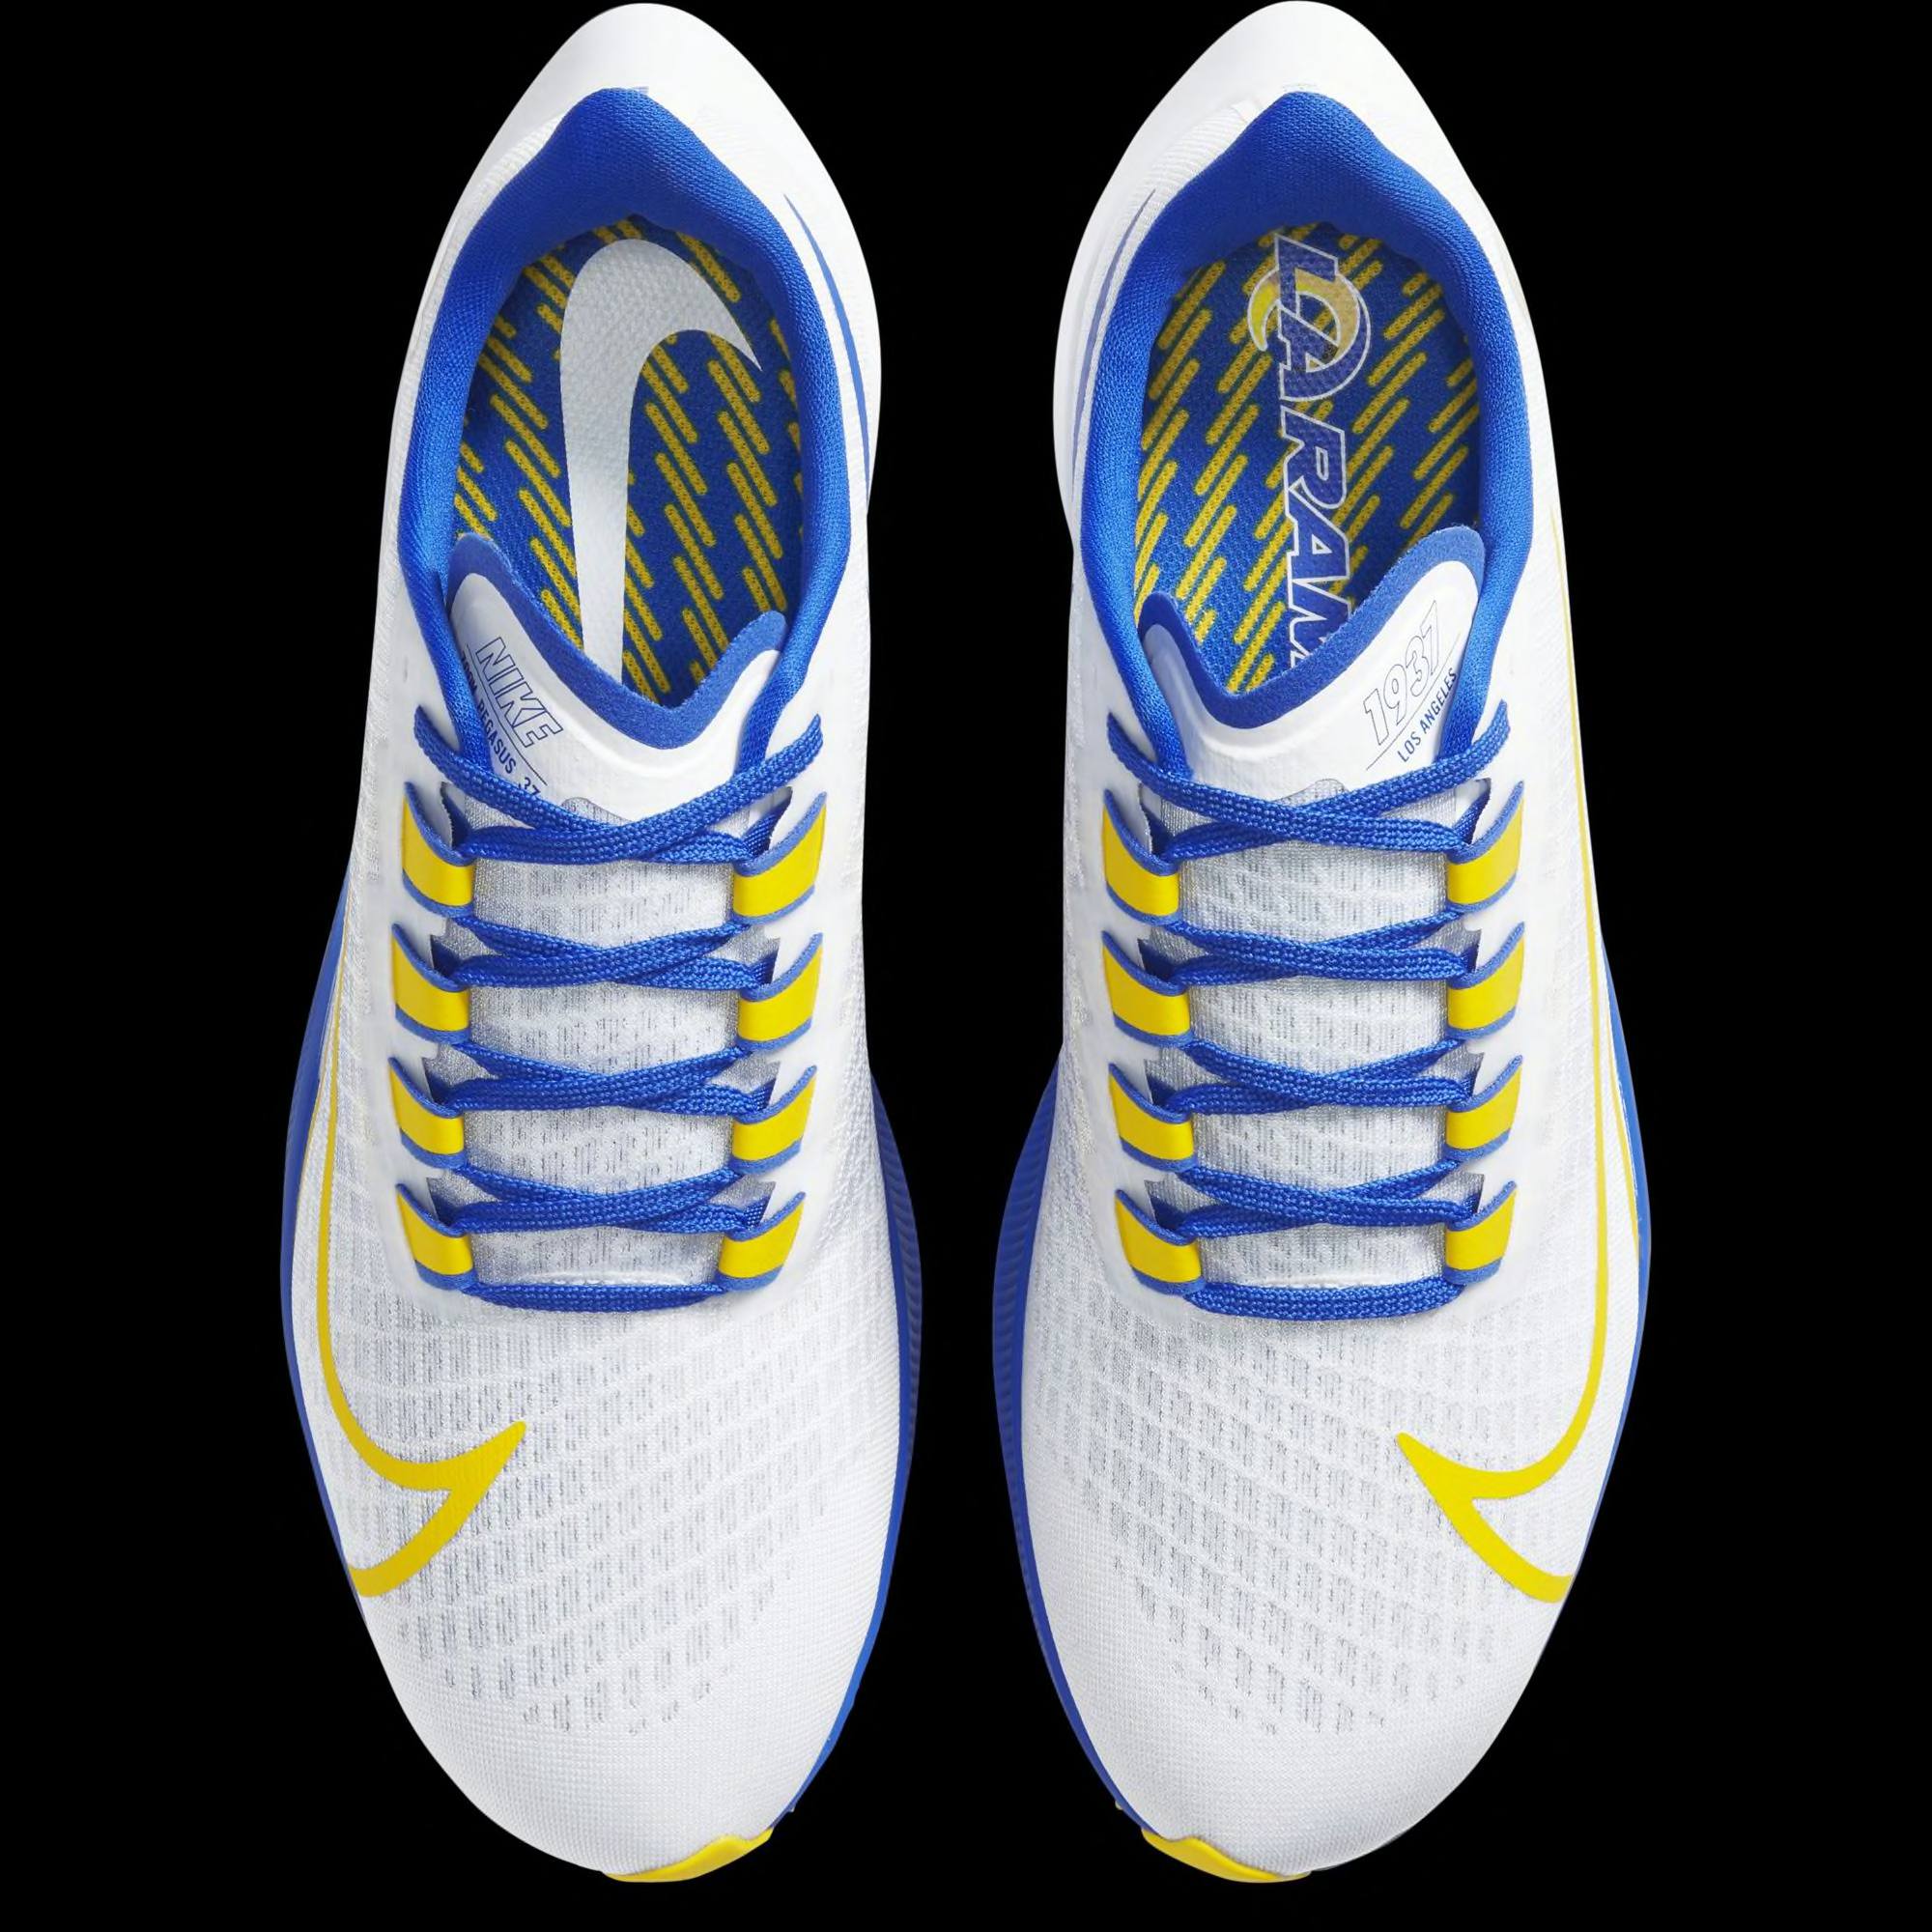 These Los Angeles Rams Nike shoes are 